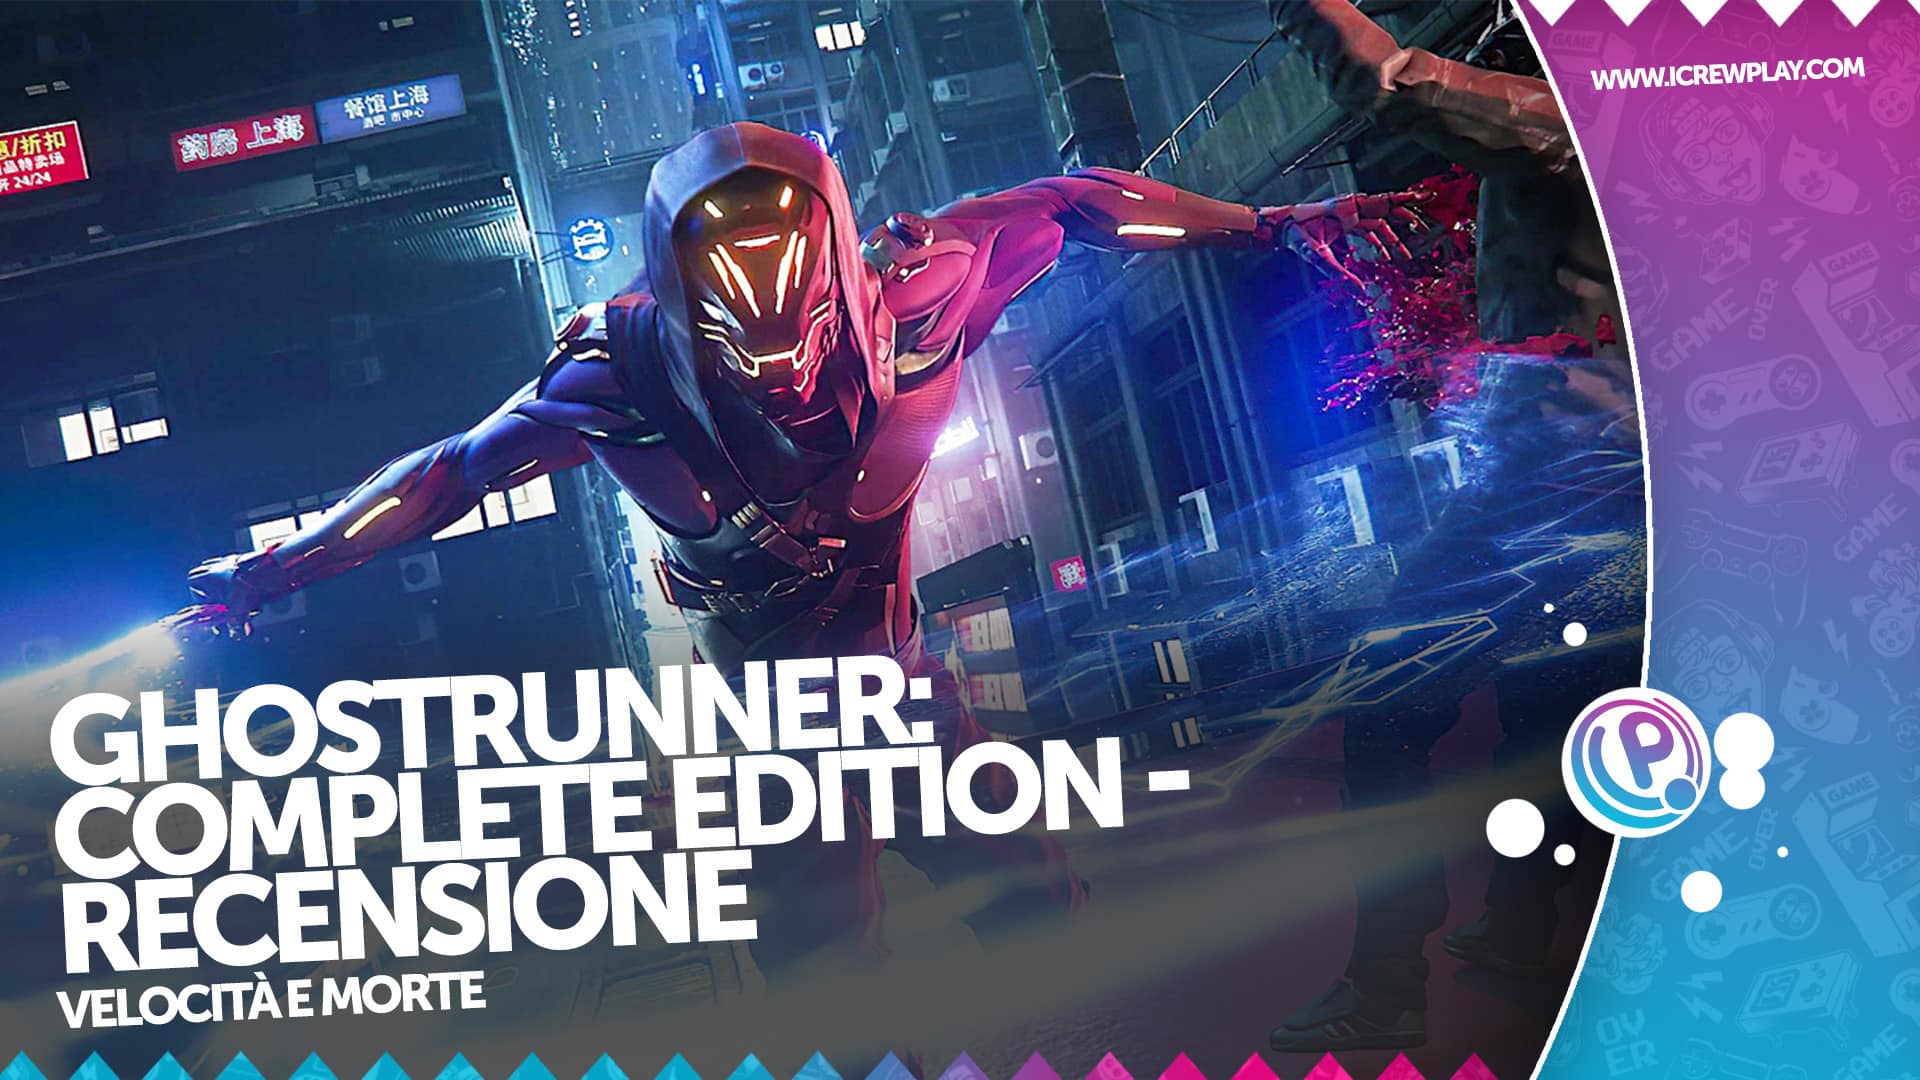 Ghostrunner: Complete Edition - Recensione per PlayStation 5 14